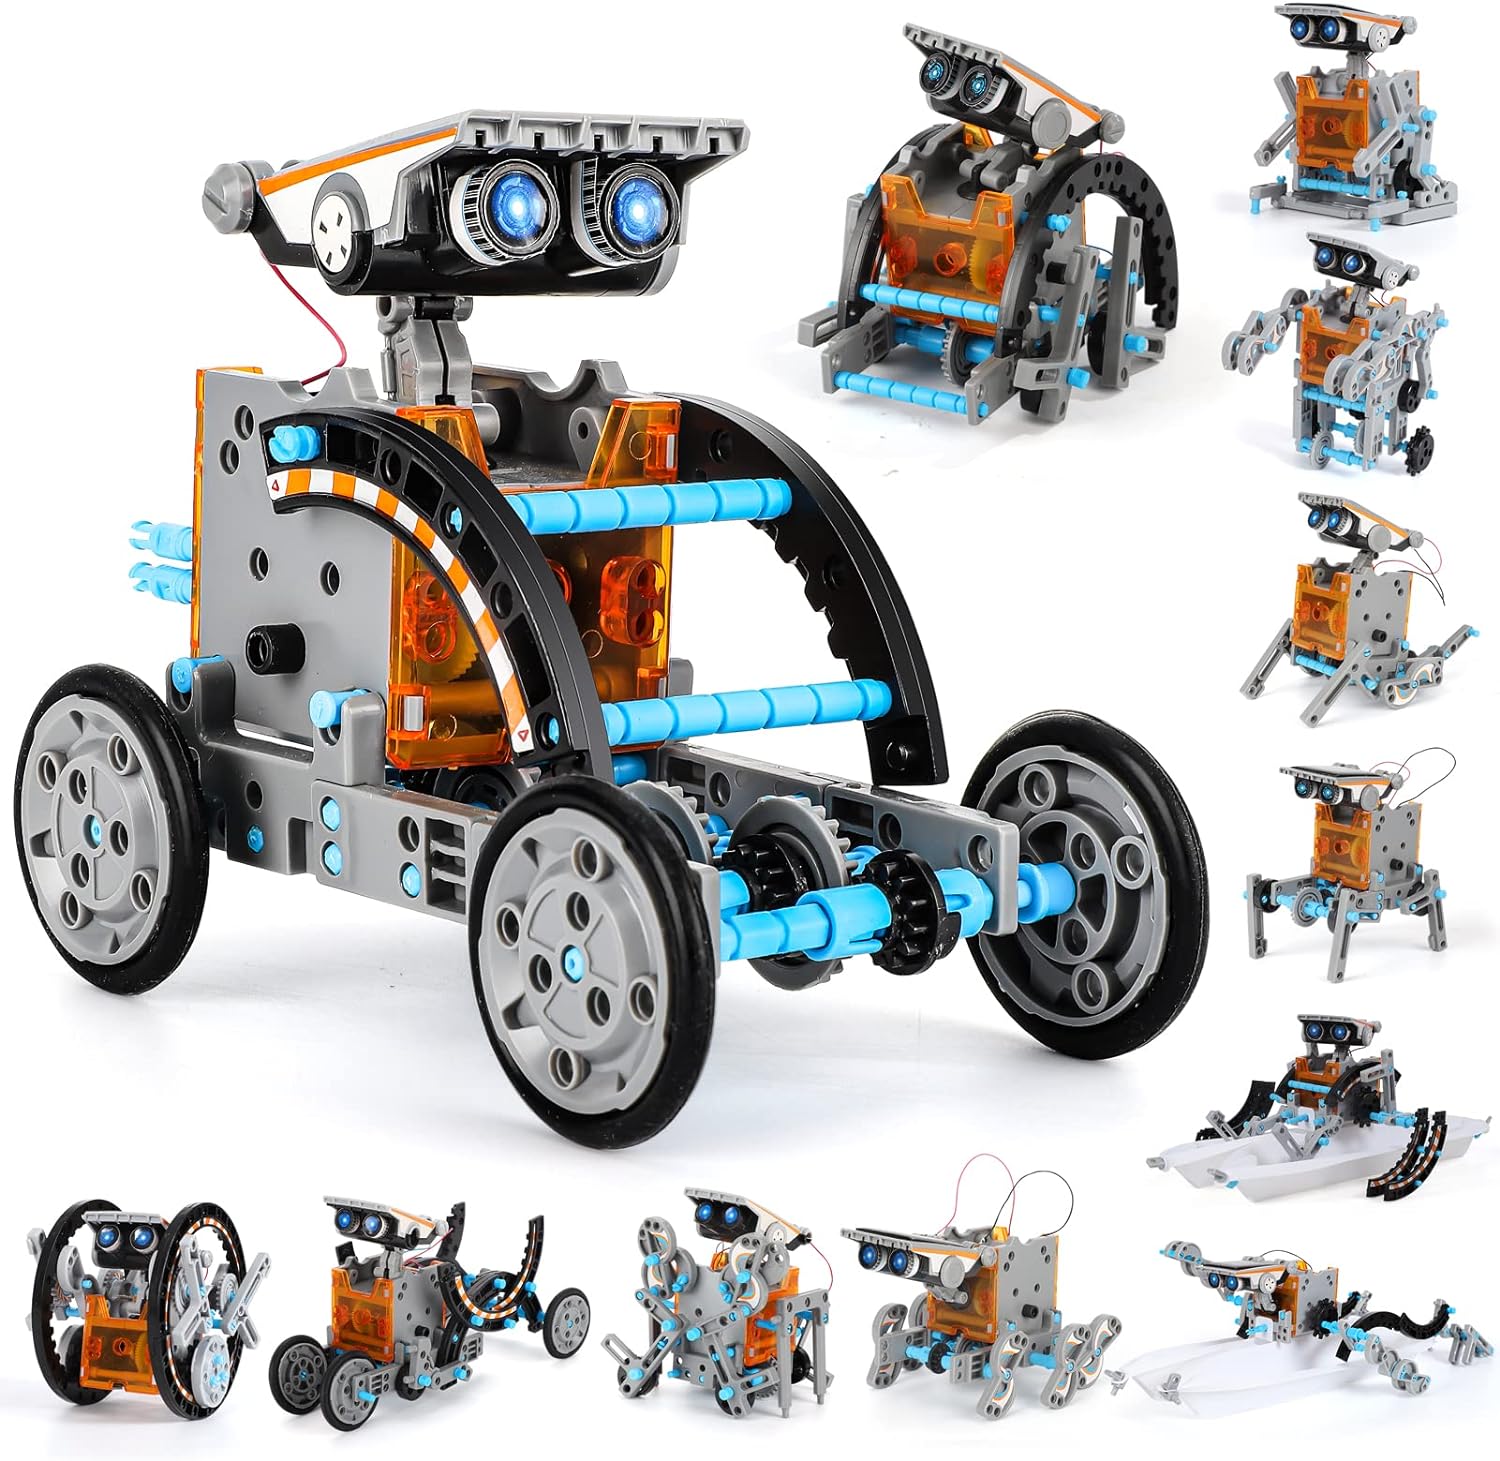 I purchased this robot kit for my six year old son to assemble. The directions were obviously too tedious for him so we watched a few YouTube videos that explained how to build the robot. It was so simple that my 6 year old refused to let me help with building the roly-poly robot. I literally wasn't allowed to touch it. After about an hour and a half, he built the robot on his own (he only cut out the parts as needed--with child scissors) The solar component was a bit weak and so the robot only 